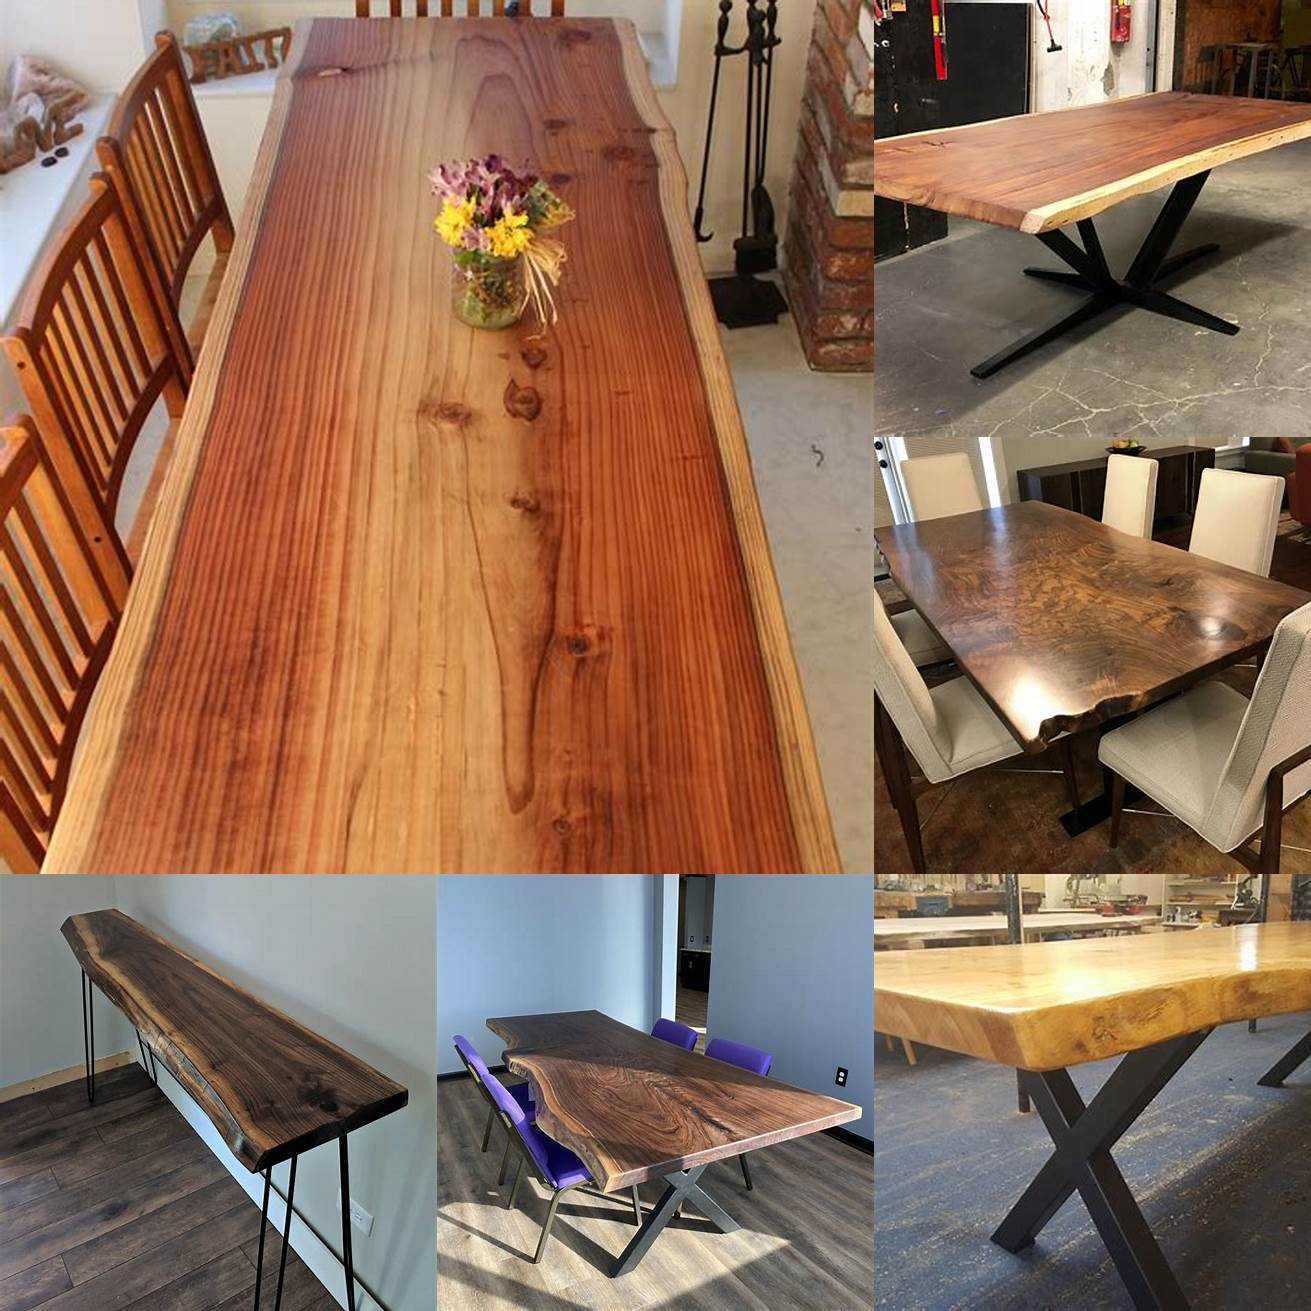 Custom dining table with live-edge wood and metal legs